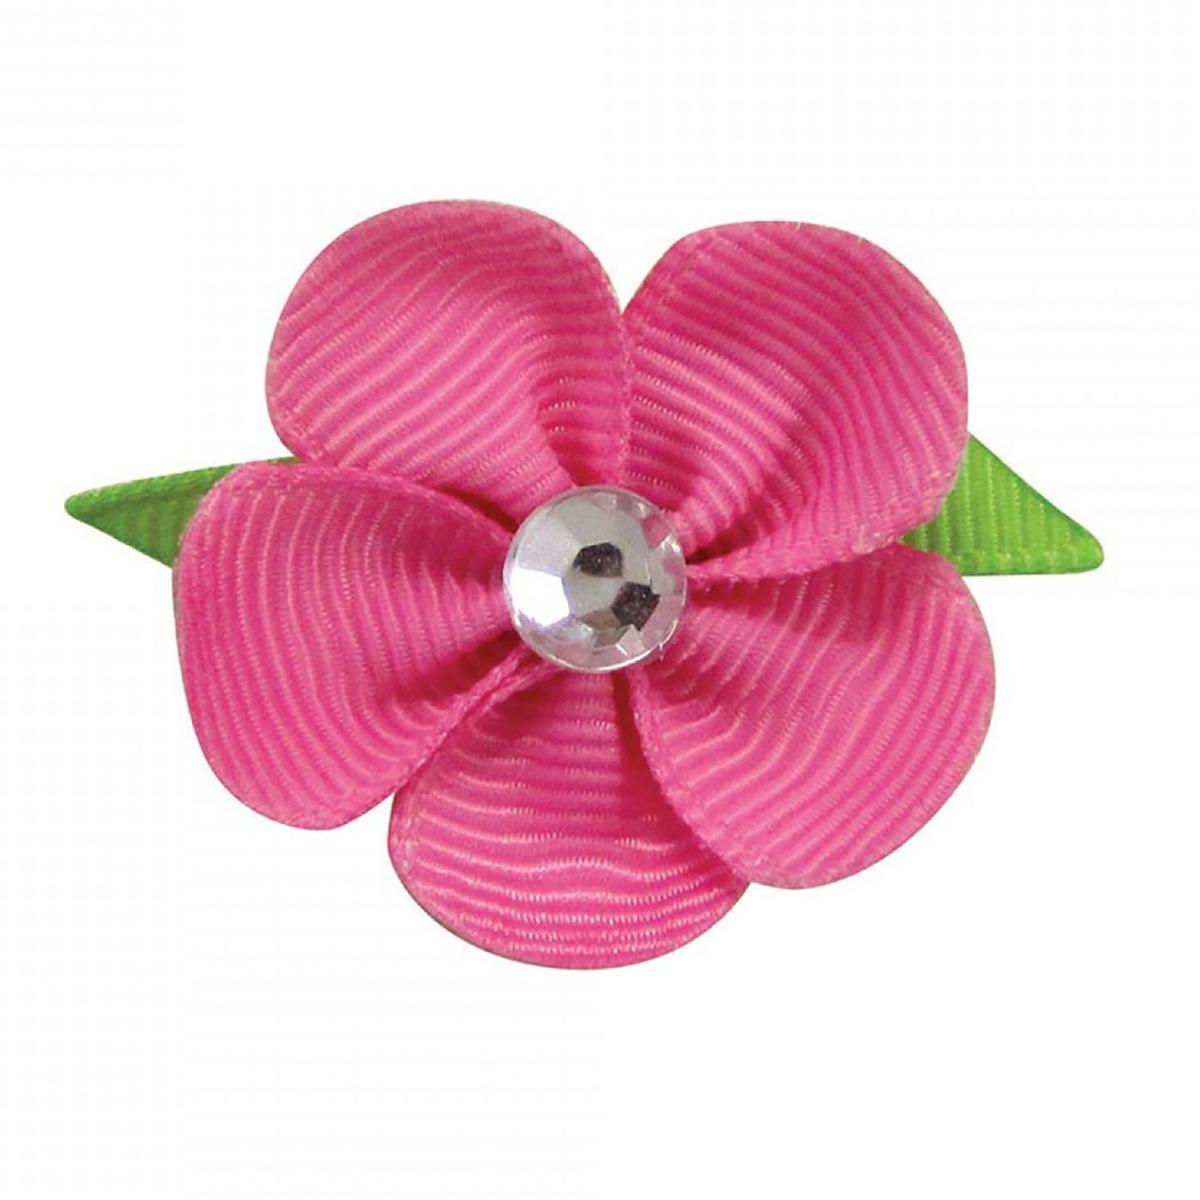 Flower Dog Bow with Alligator Clip - Hot Pink